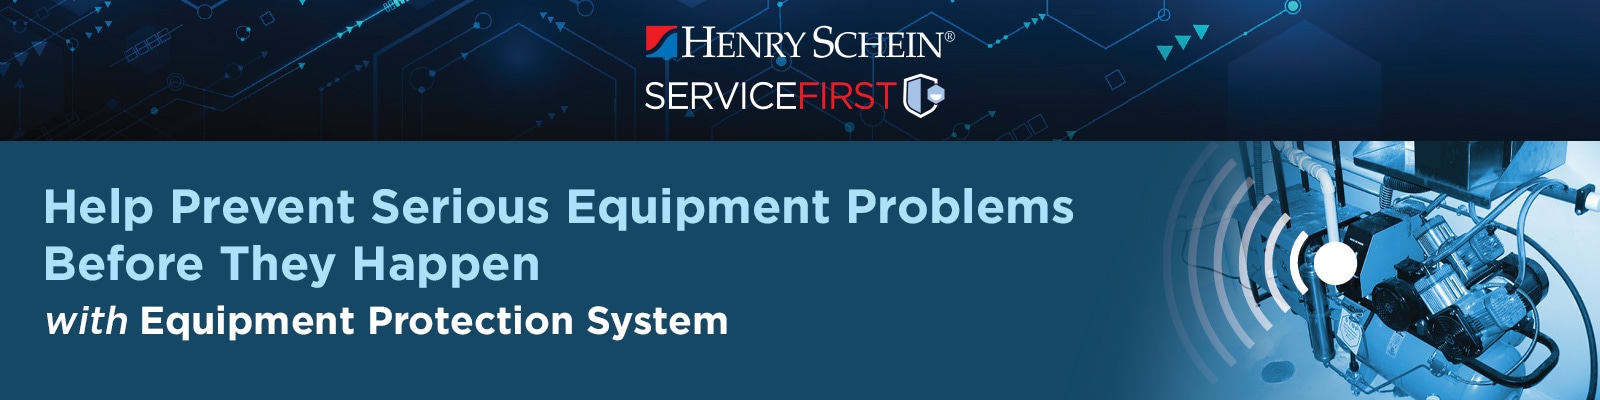 Equipment Protection System